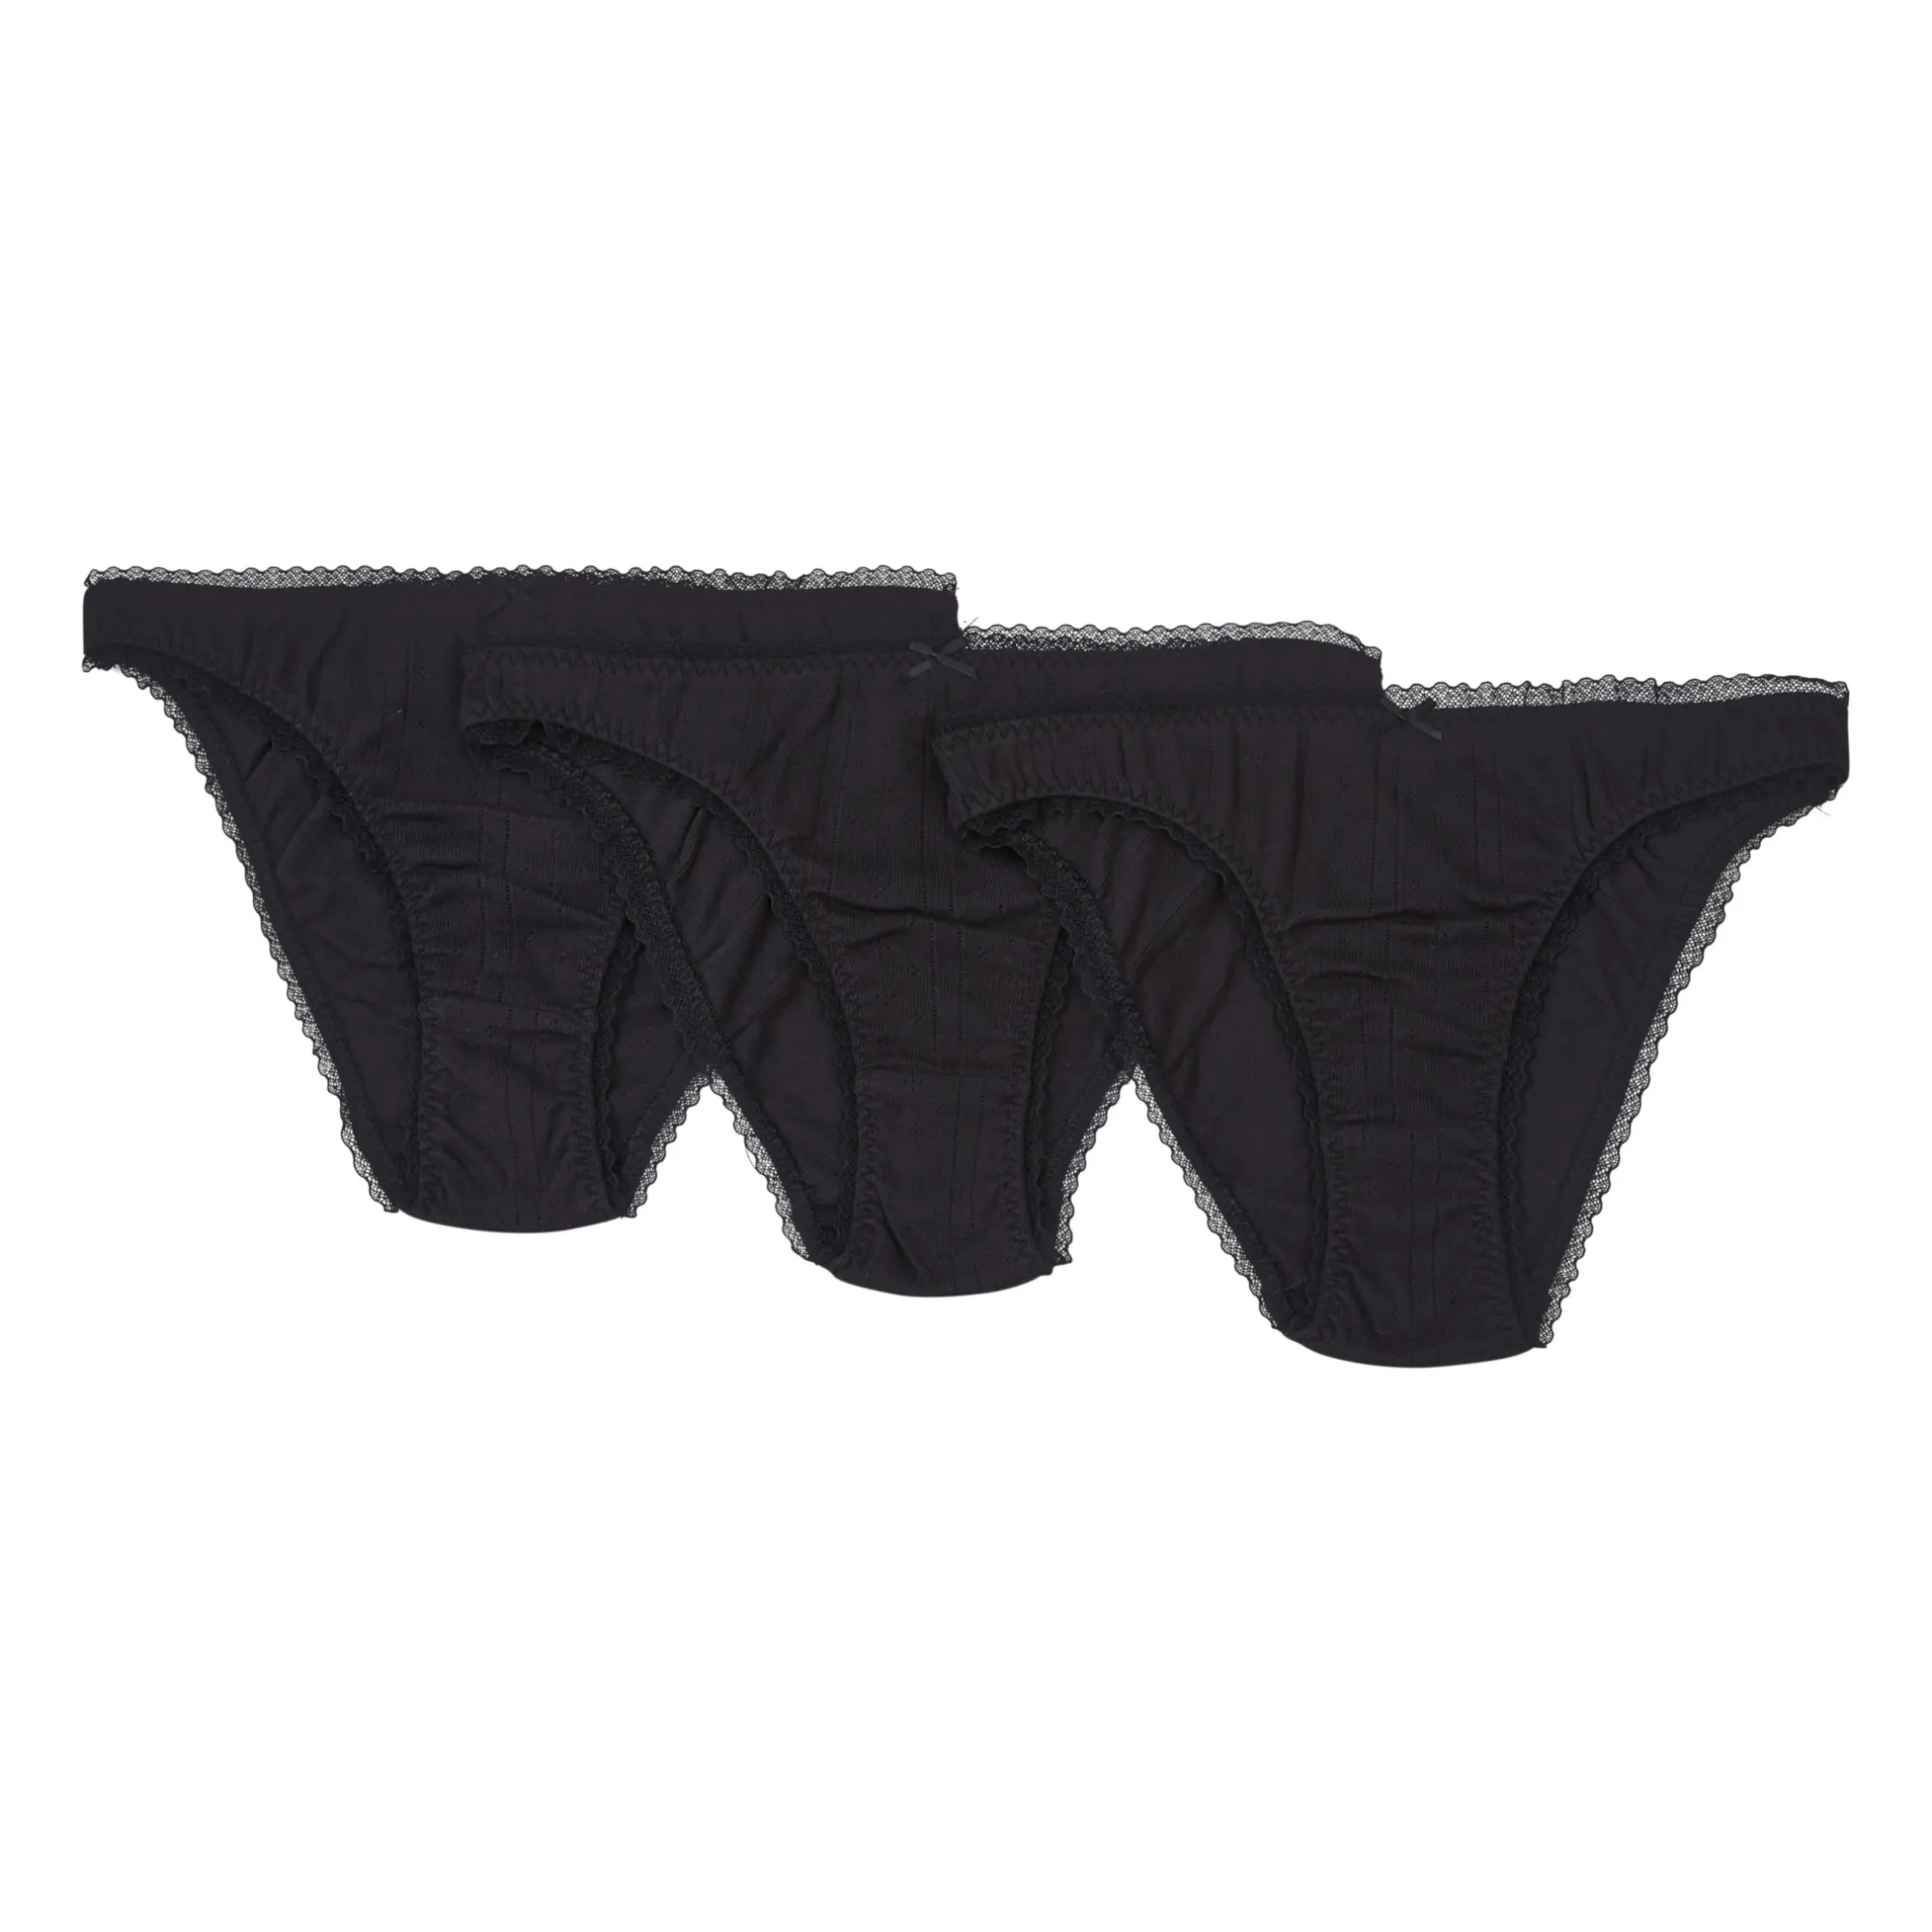 Cou Cou Intimates - Pack of 3 Pointelle Organic Cotton High Waist Briefs -  Black